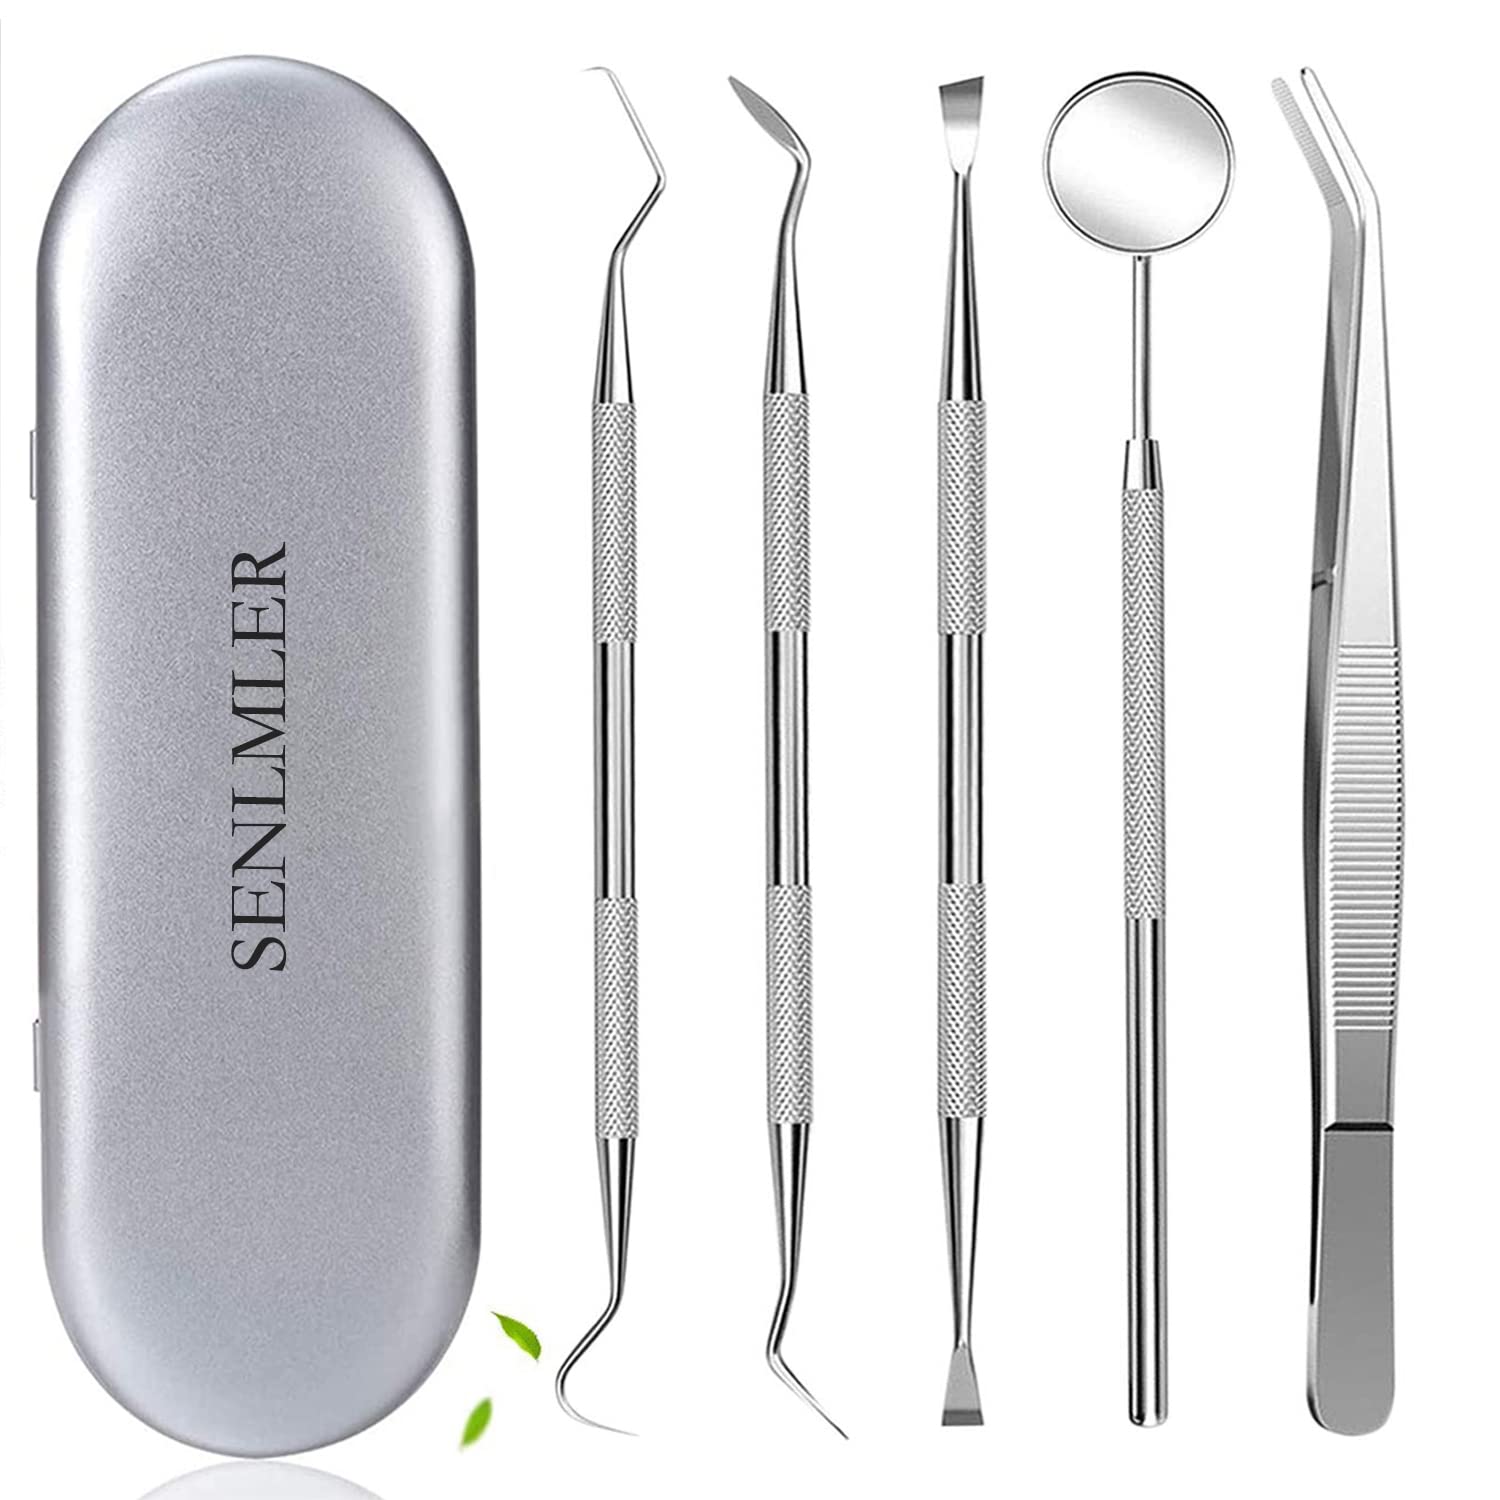 SENLMLER Dental Tools, Professional Teeth Cleaner Plaque Remover tool Kit,  Stainless Steel Dental Pick Scaler Tooth Tartar Cleaning Set for Dentist,  Personal Using, Pets Oral Care with Case Style 2